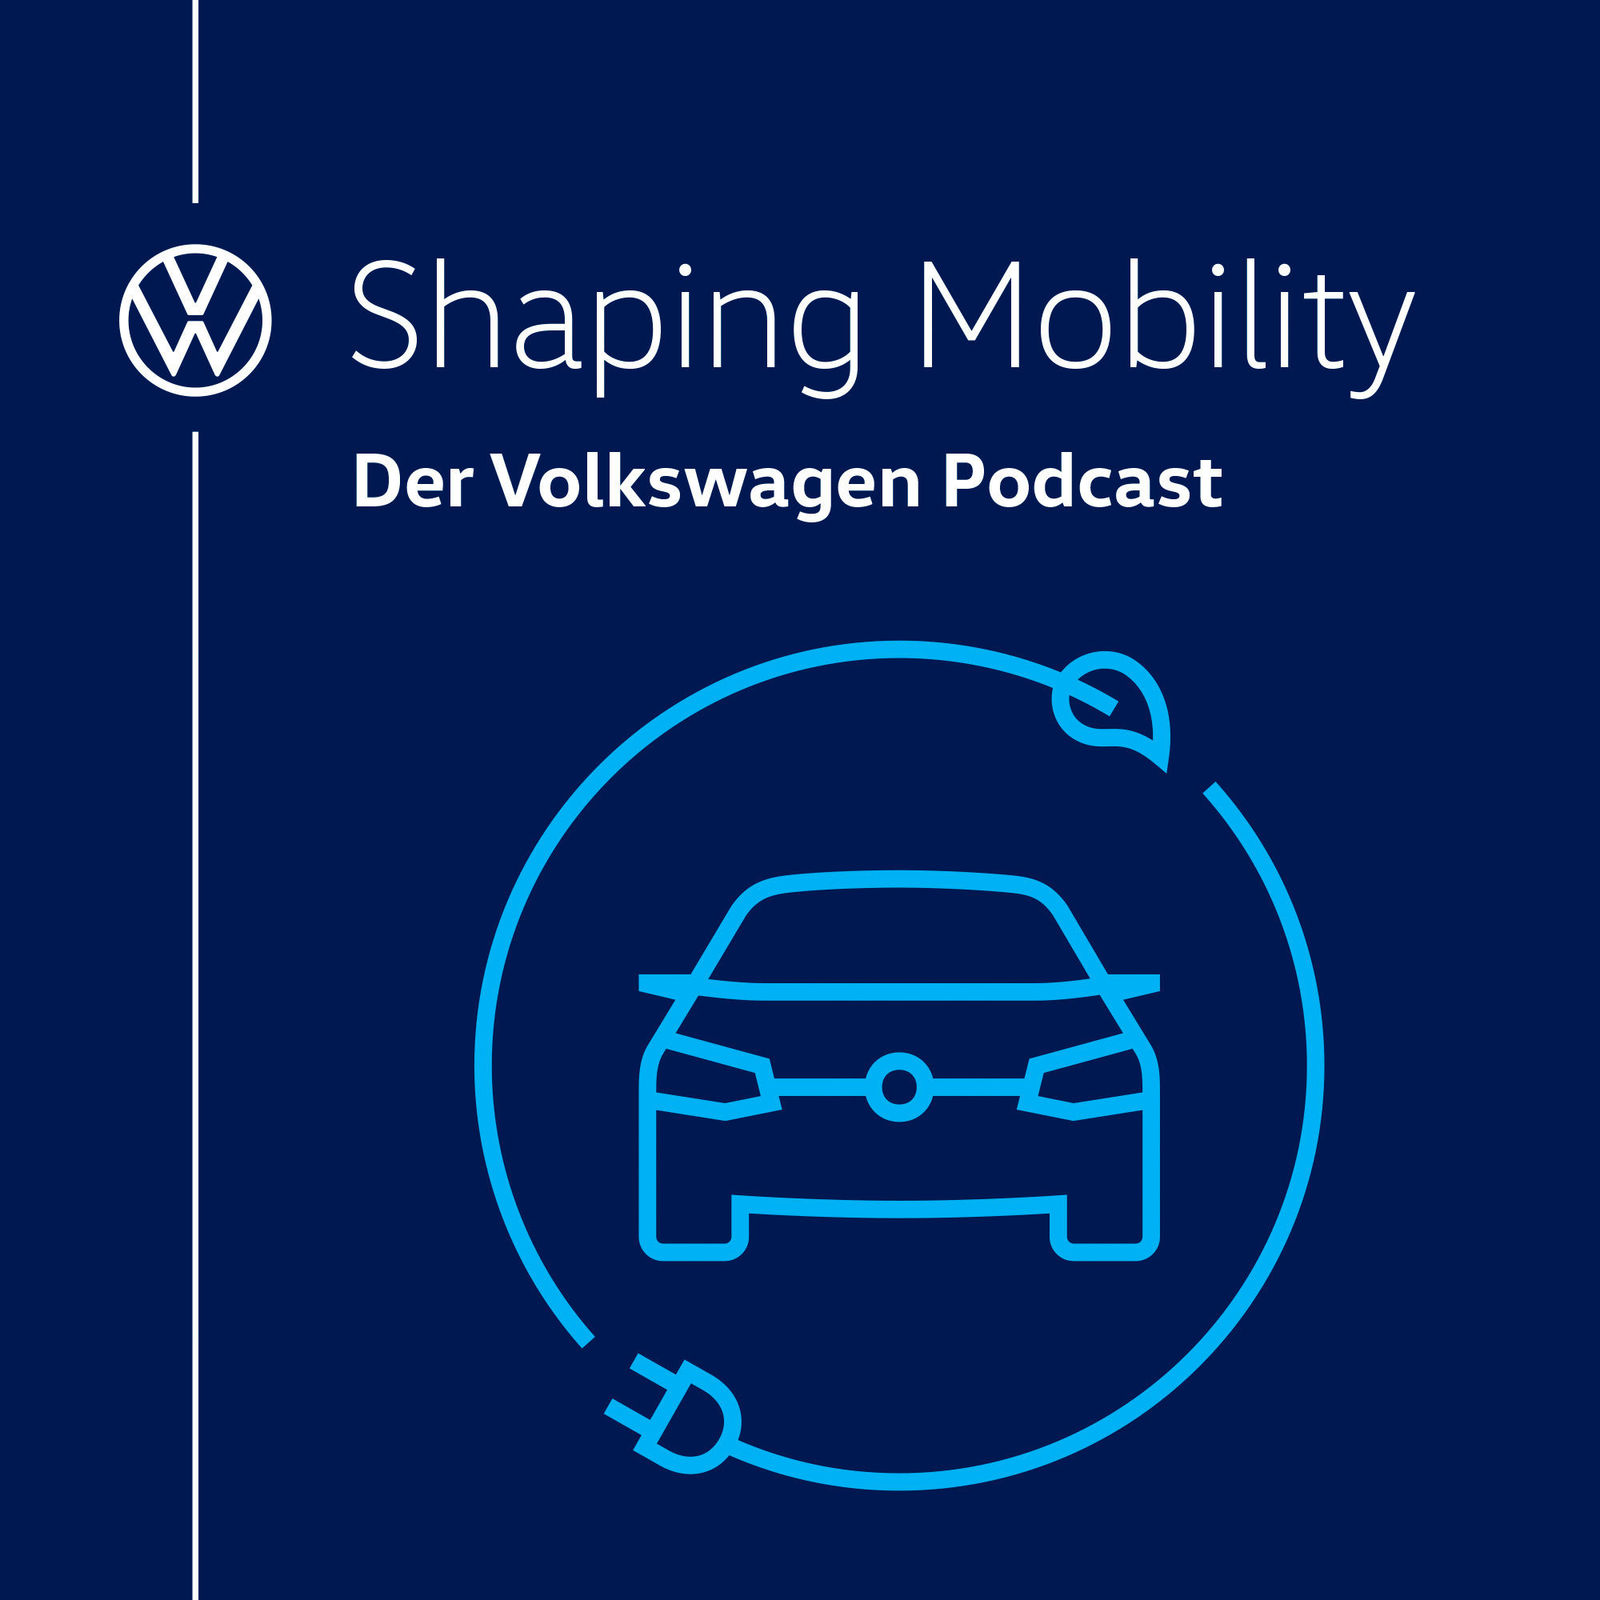 Shaping Mobility - The Volkswagen Podcast